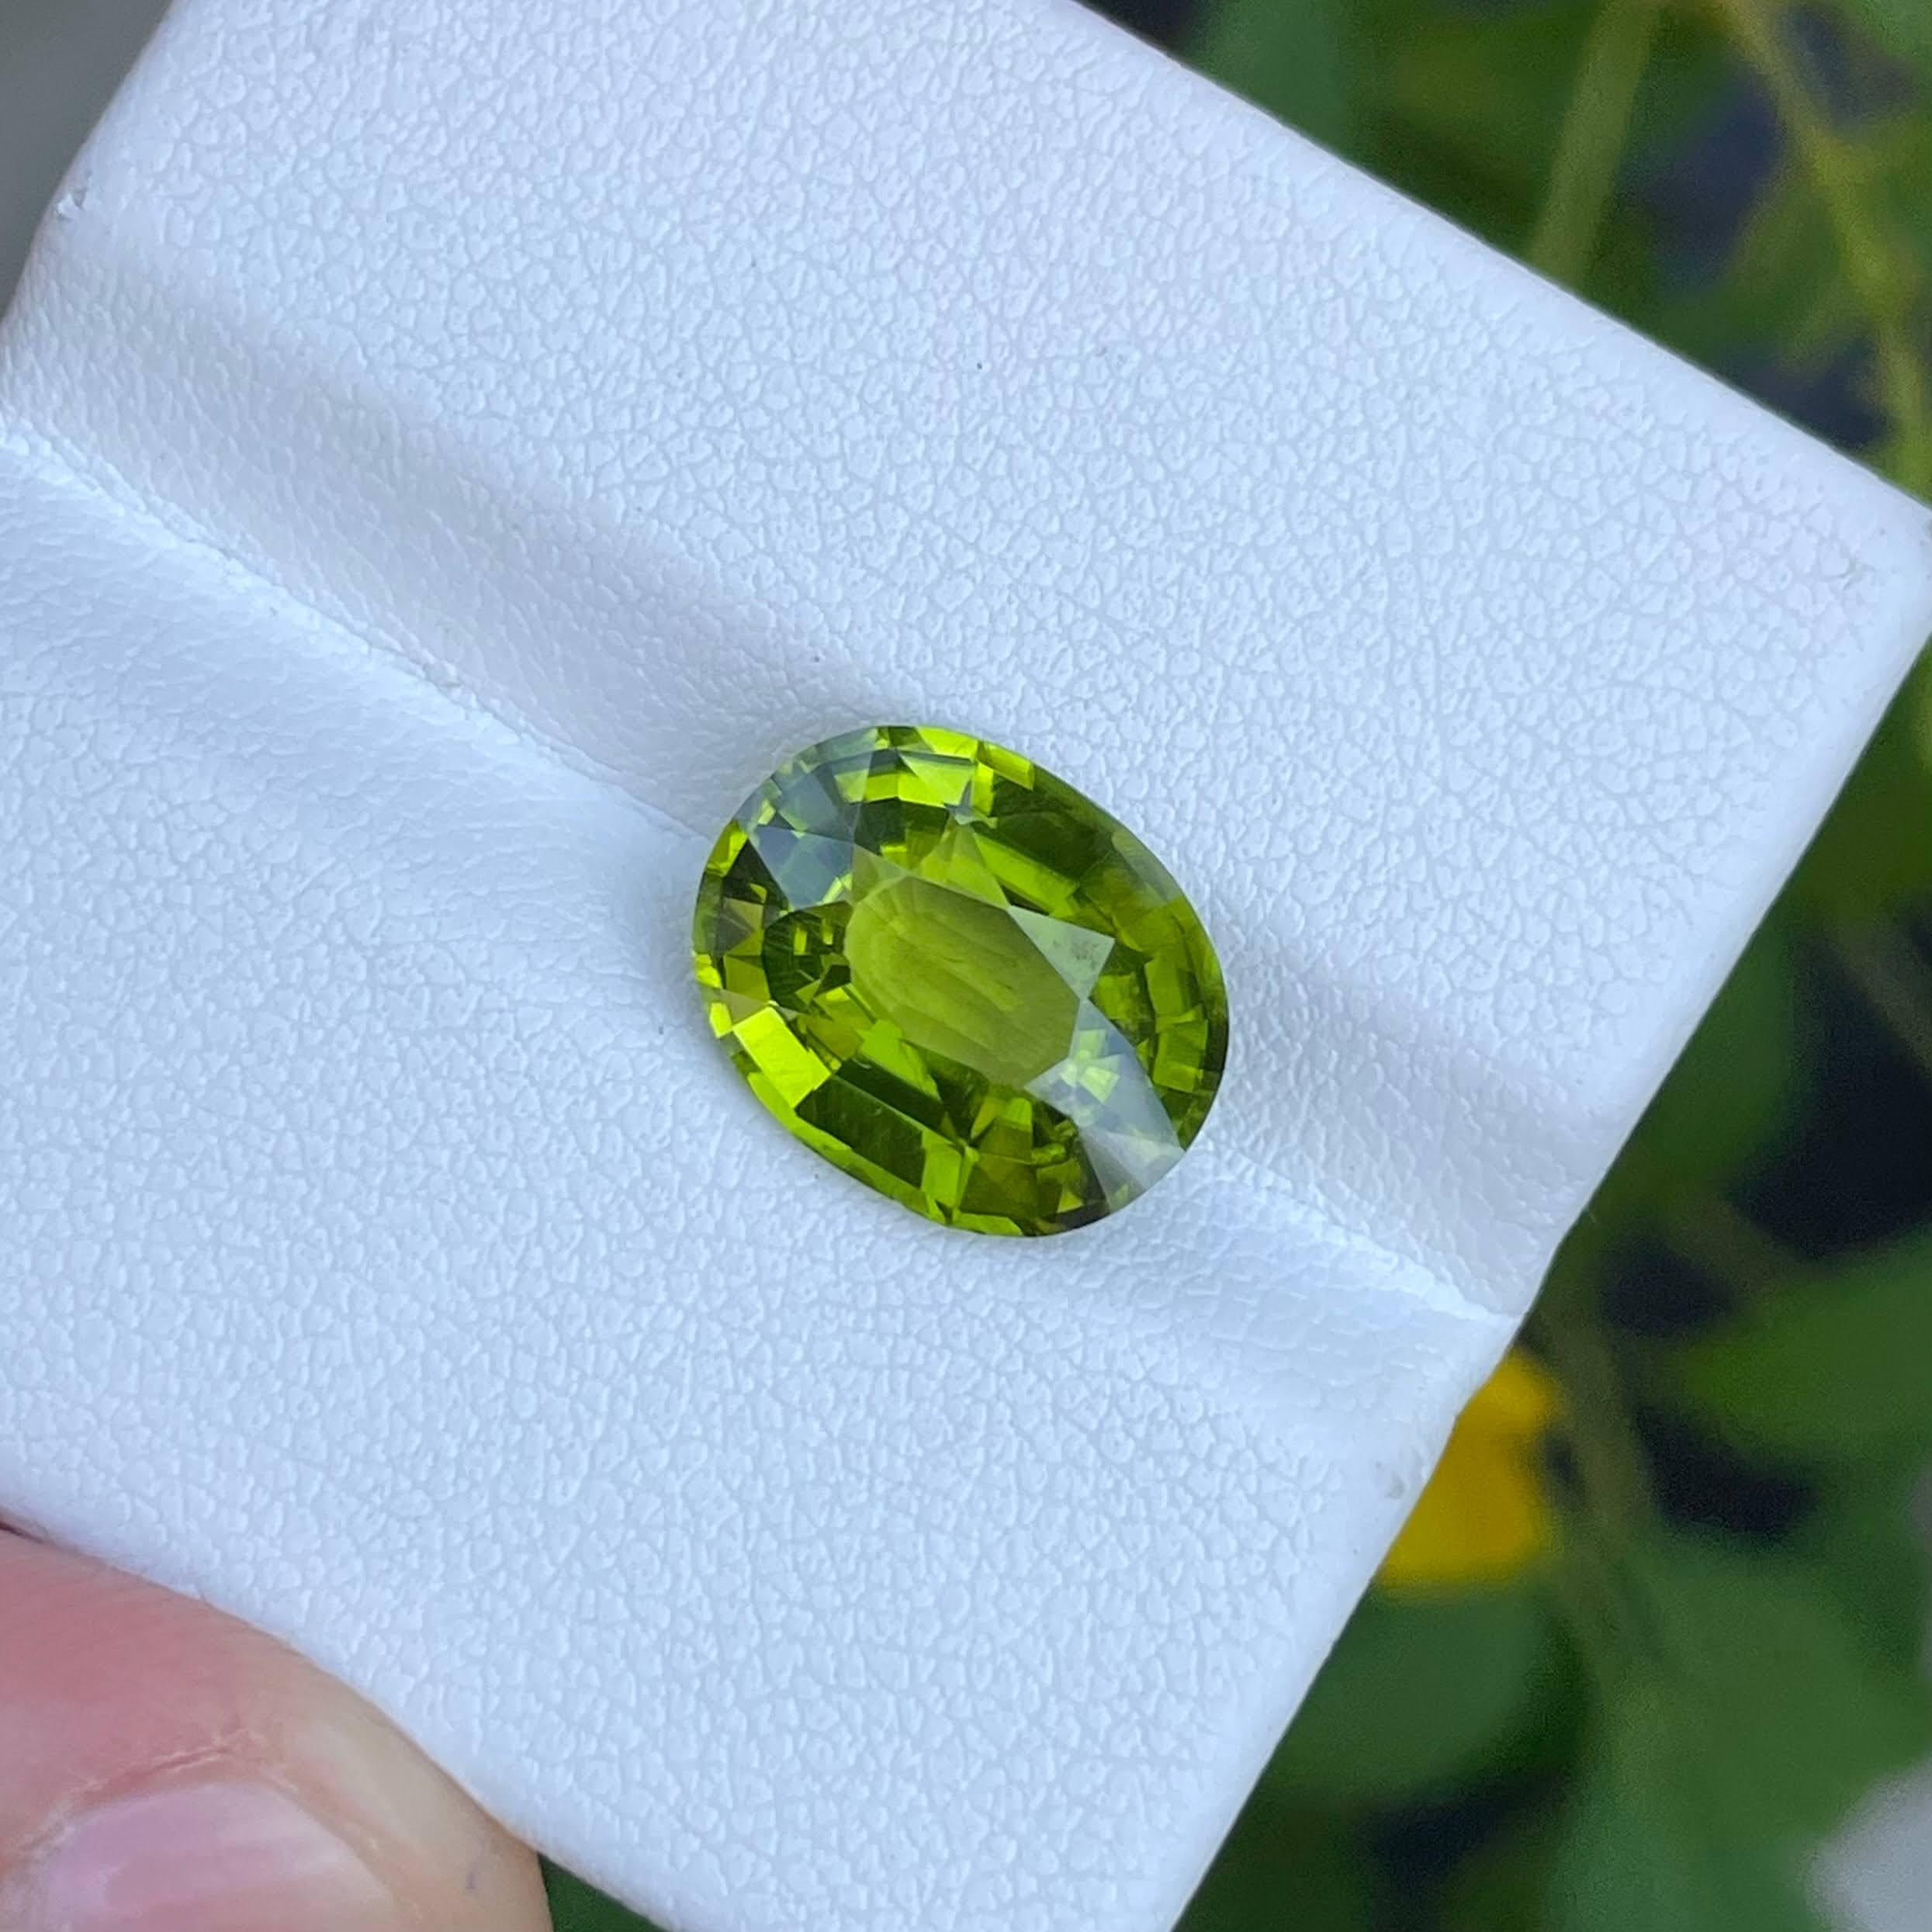 Weight 4.75 carats 
Dimensions 12.4x10.0x5.5 mm
Treatment none 
Origin Pakistan 
Clarity VVS
Shape oval 
Cut oval 




The exquisite beauty of this 4.75 carat Green Peridot Stone is truly captivating, showcasing a Fancy Oval Cut that enhances its